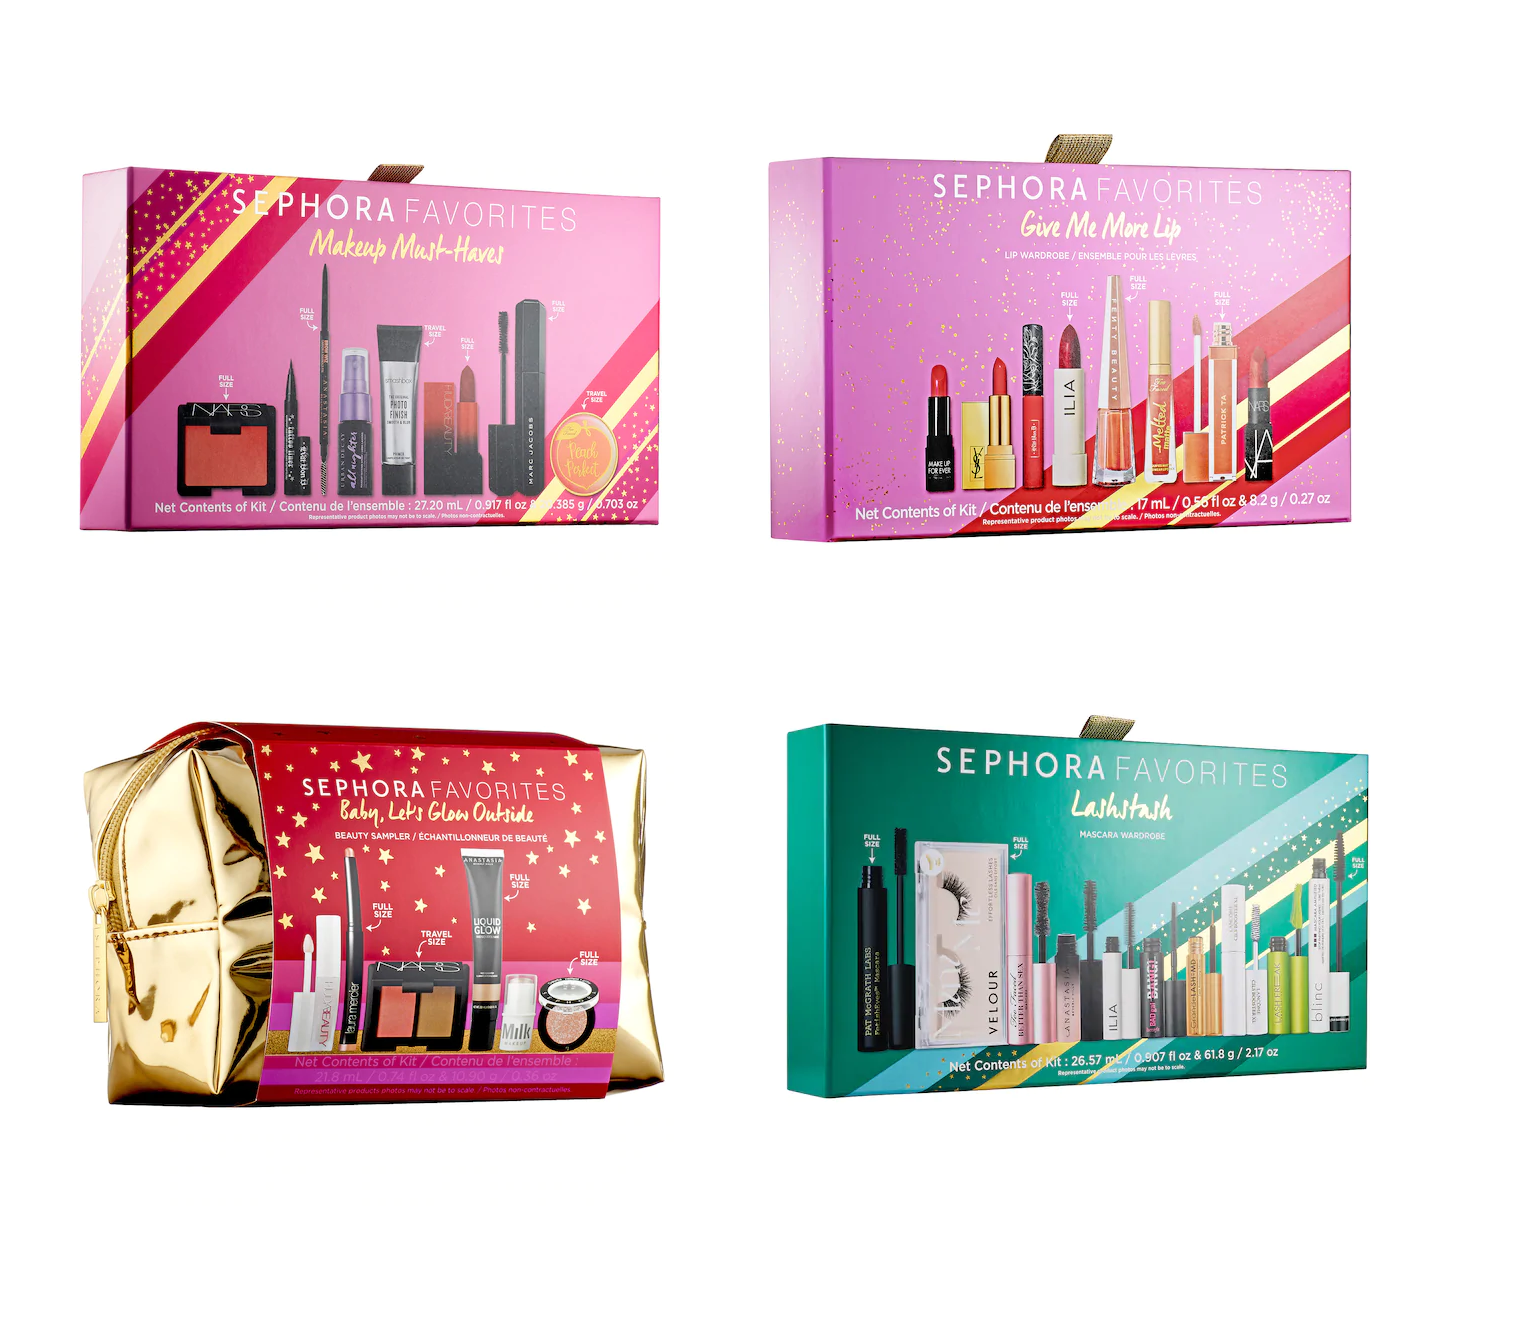 Four New Sephora Kits Available Now + Coupons! Hello Subscription